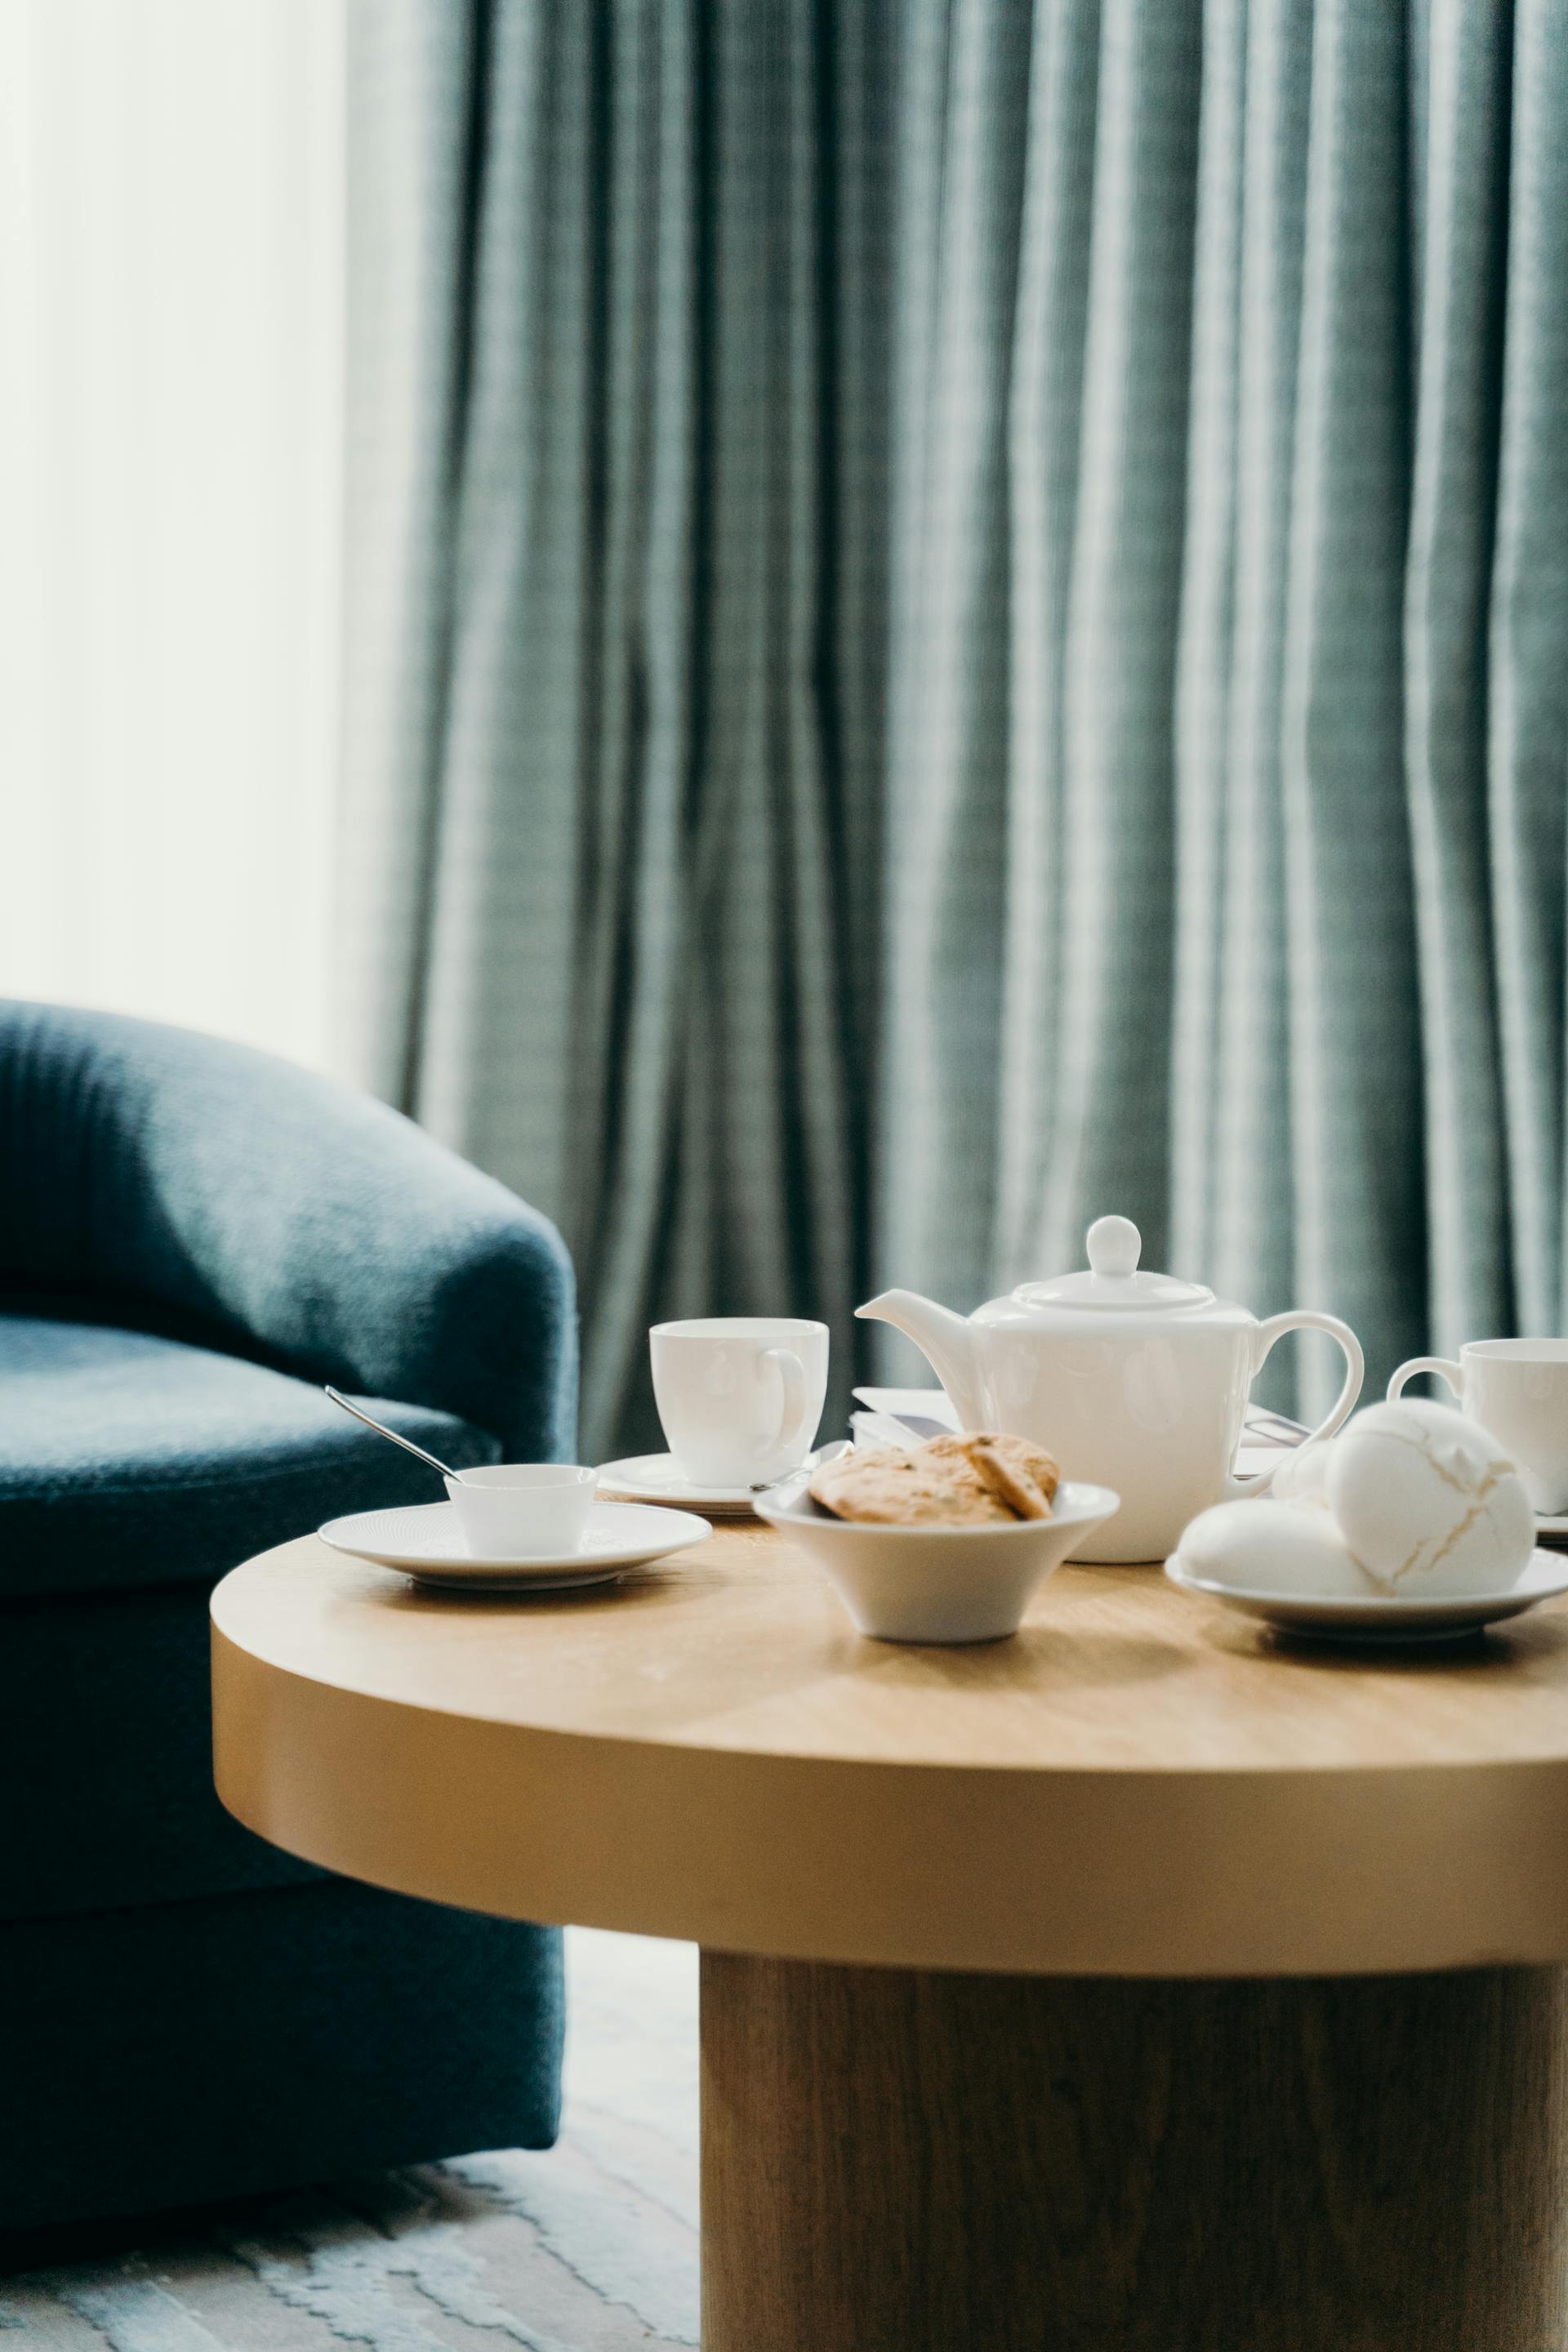 Cups of tea on a table | Source: Pexels